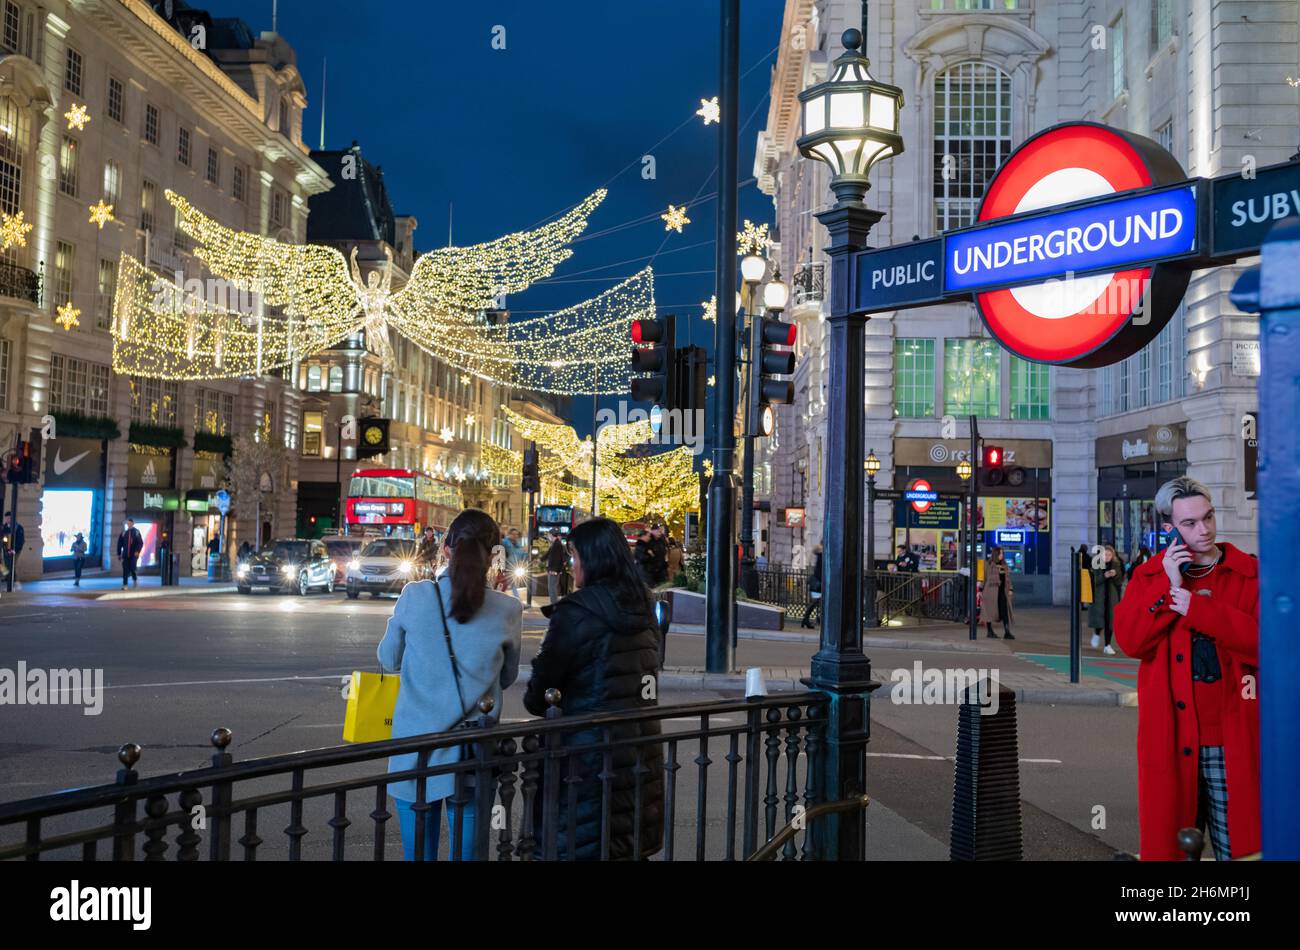 A yound man in a red coat speaks on the telephone at the entrance to Piccadilly Circus Tube Station as Christmas Lights illuminate the night streets Stock Photo